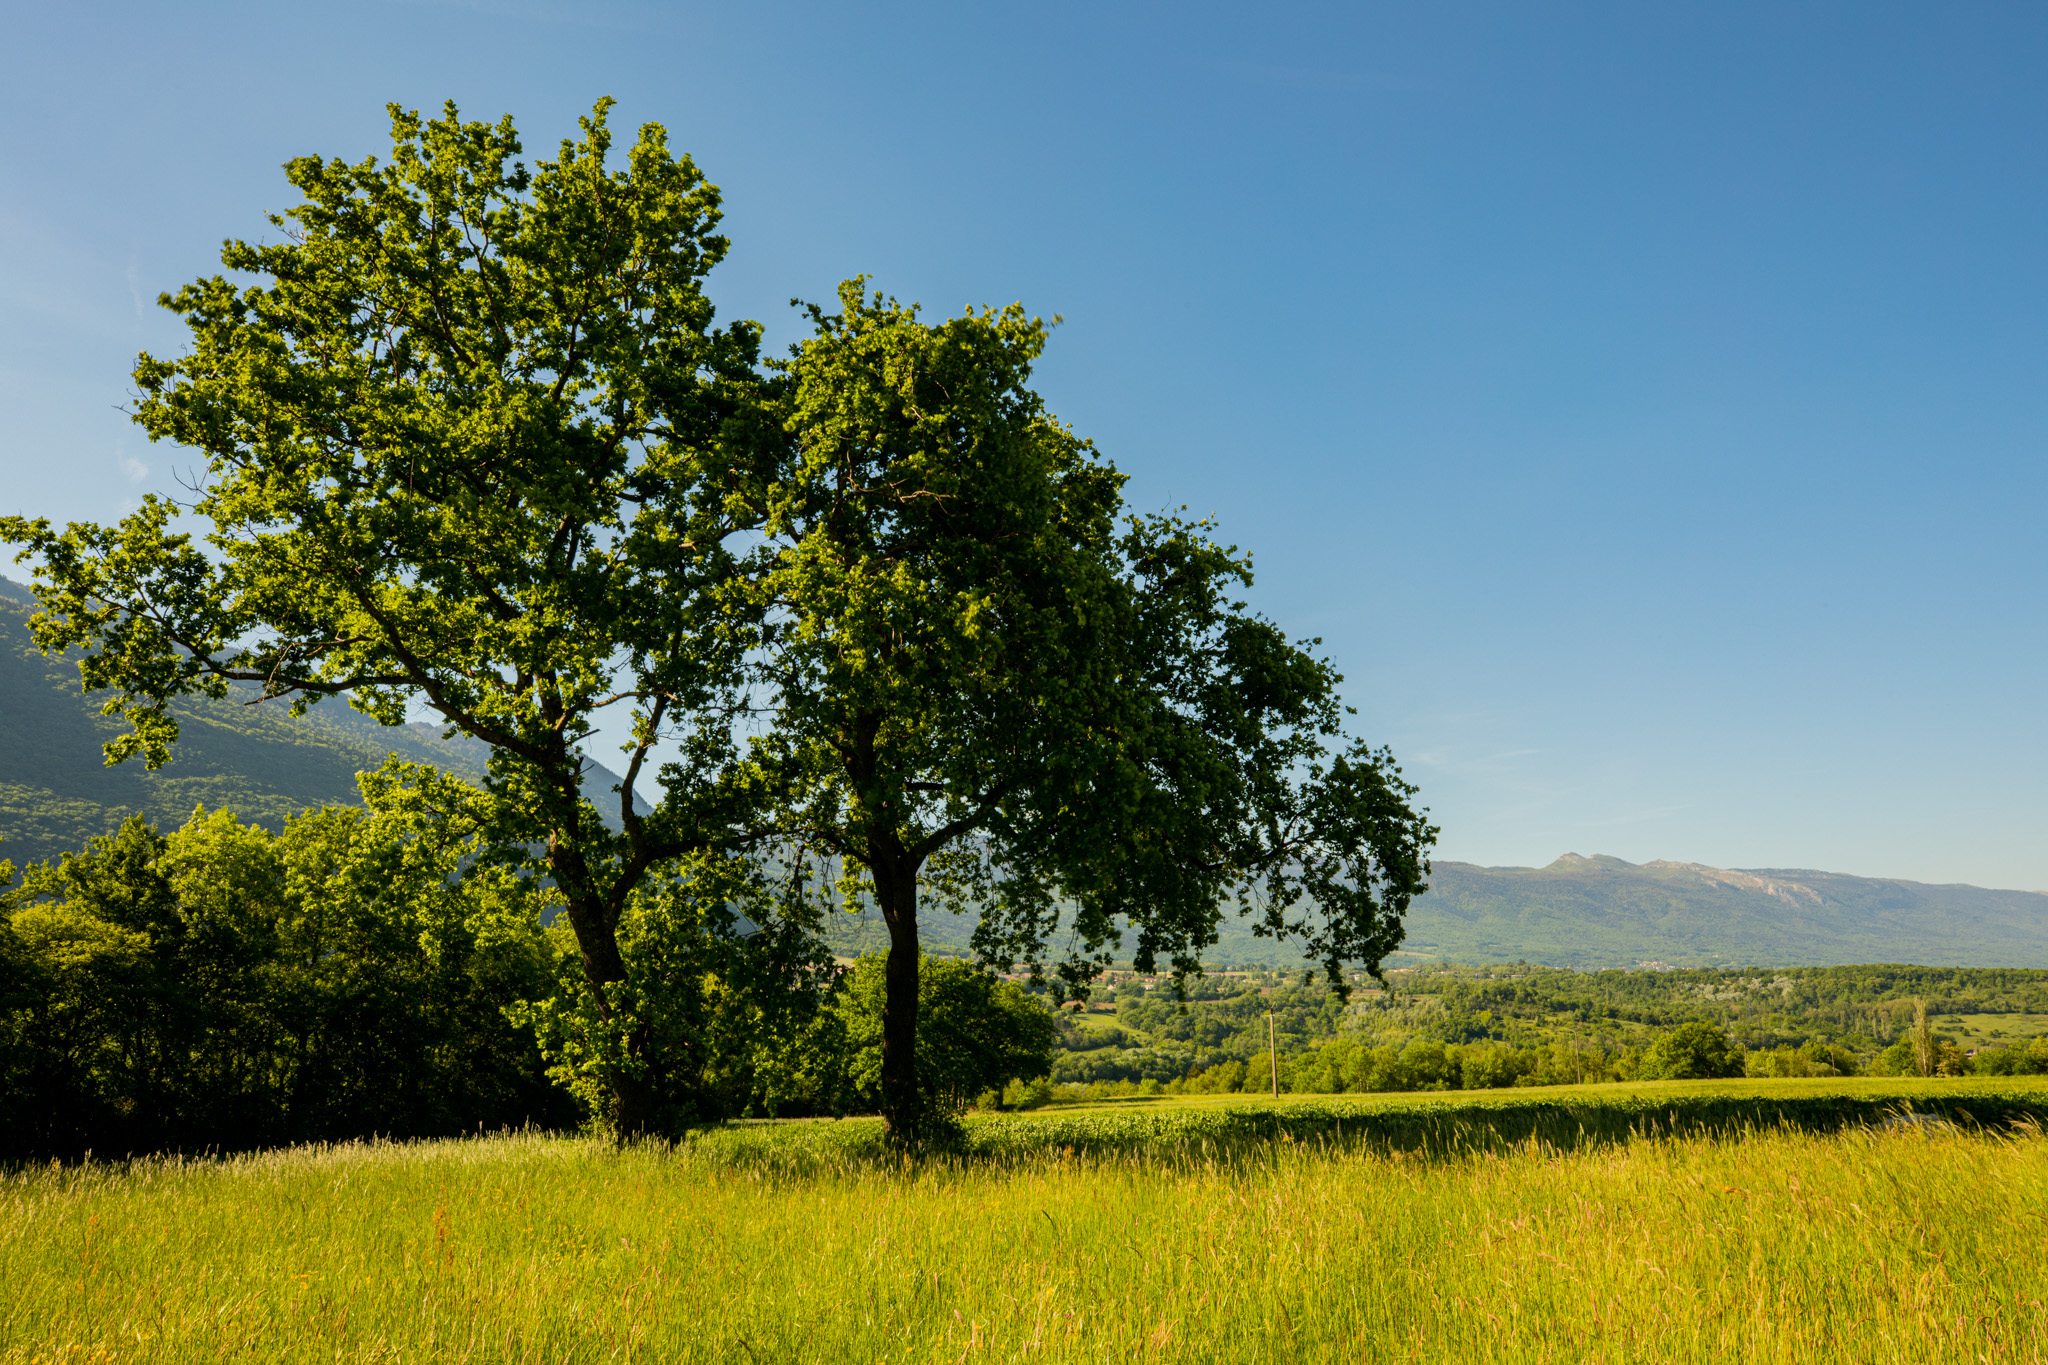 General 2048x1365 photography outdoors nature trees forest landscape mountains field greenery grass